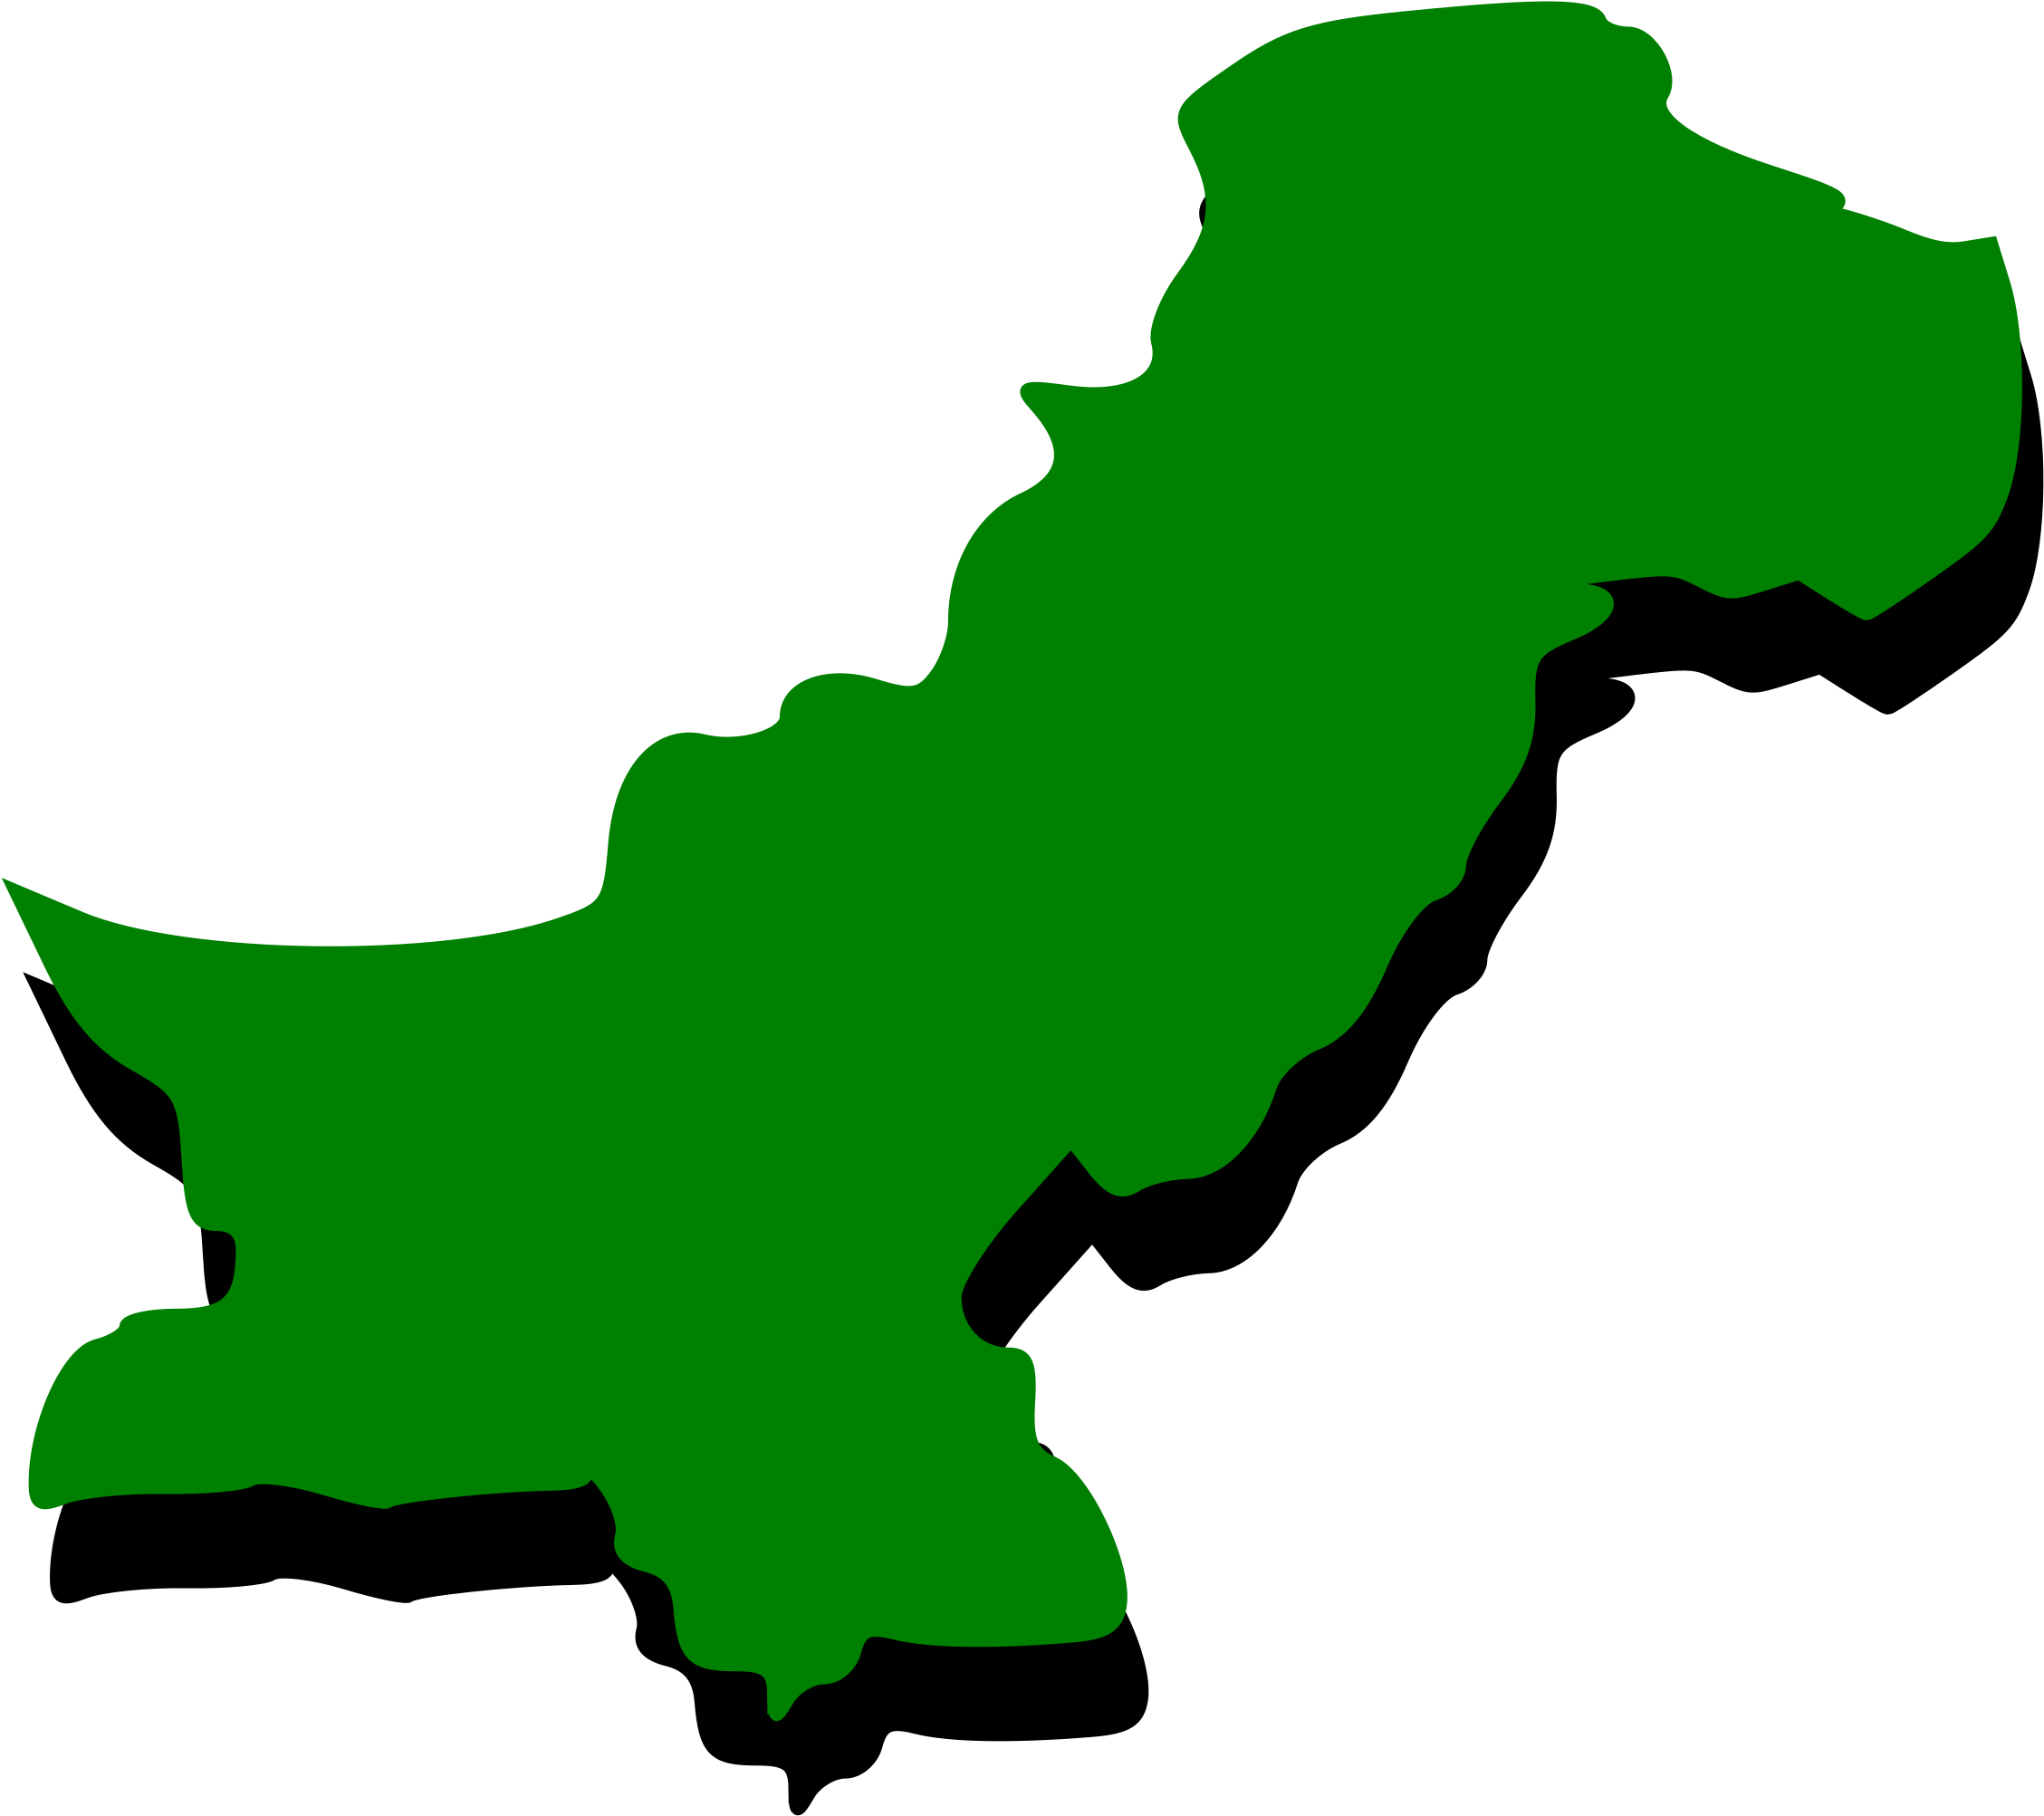 Outline Map Of Pakistan With Green Fill - Pakistan Map Png (2400x3394)